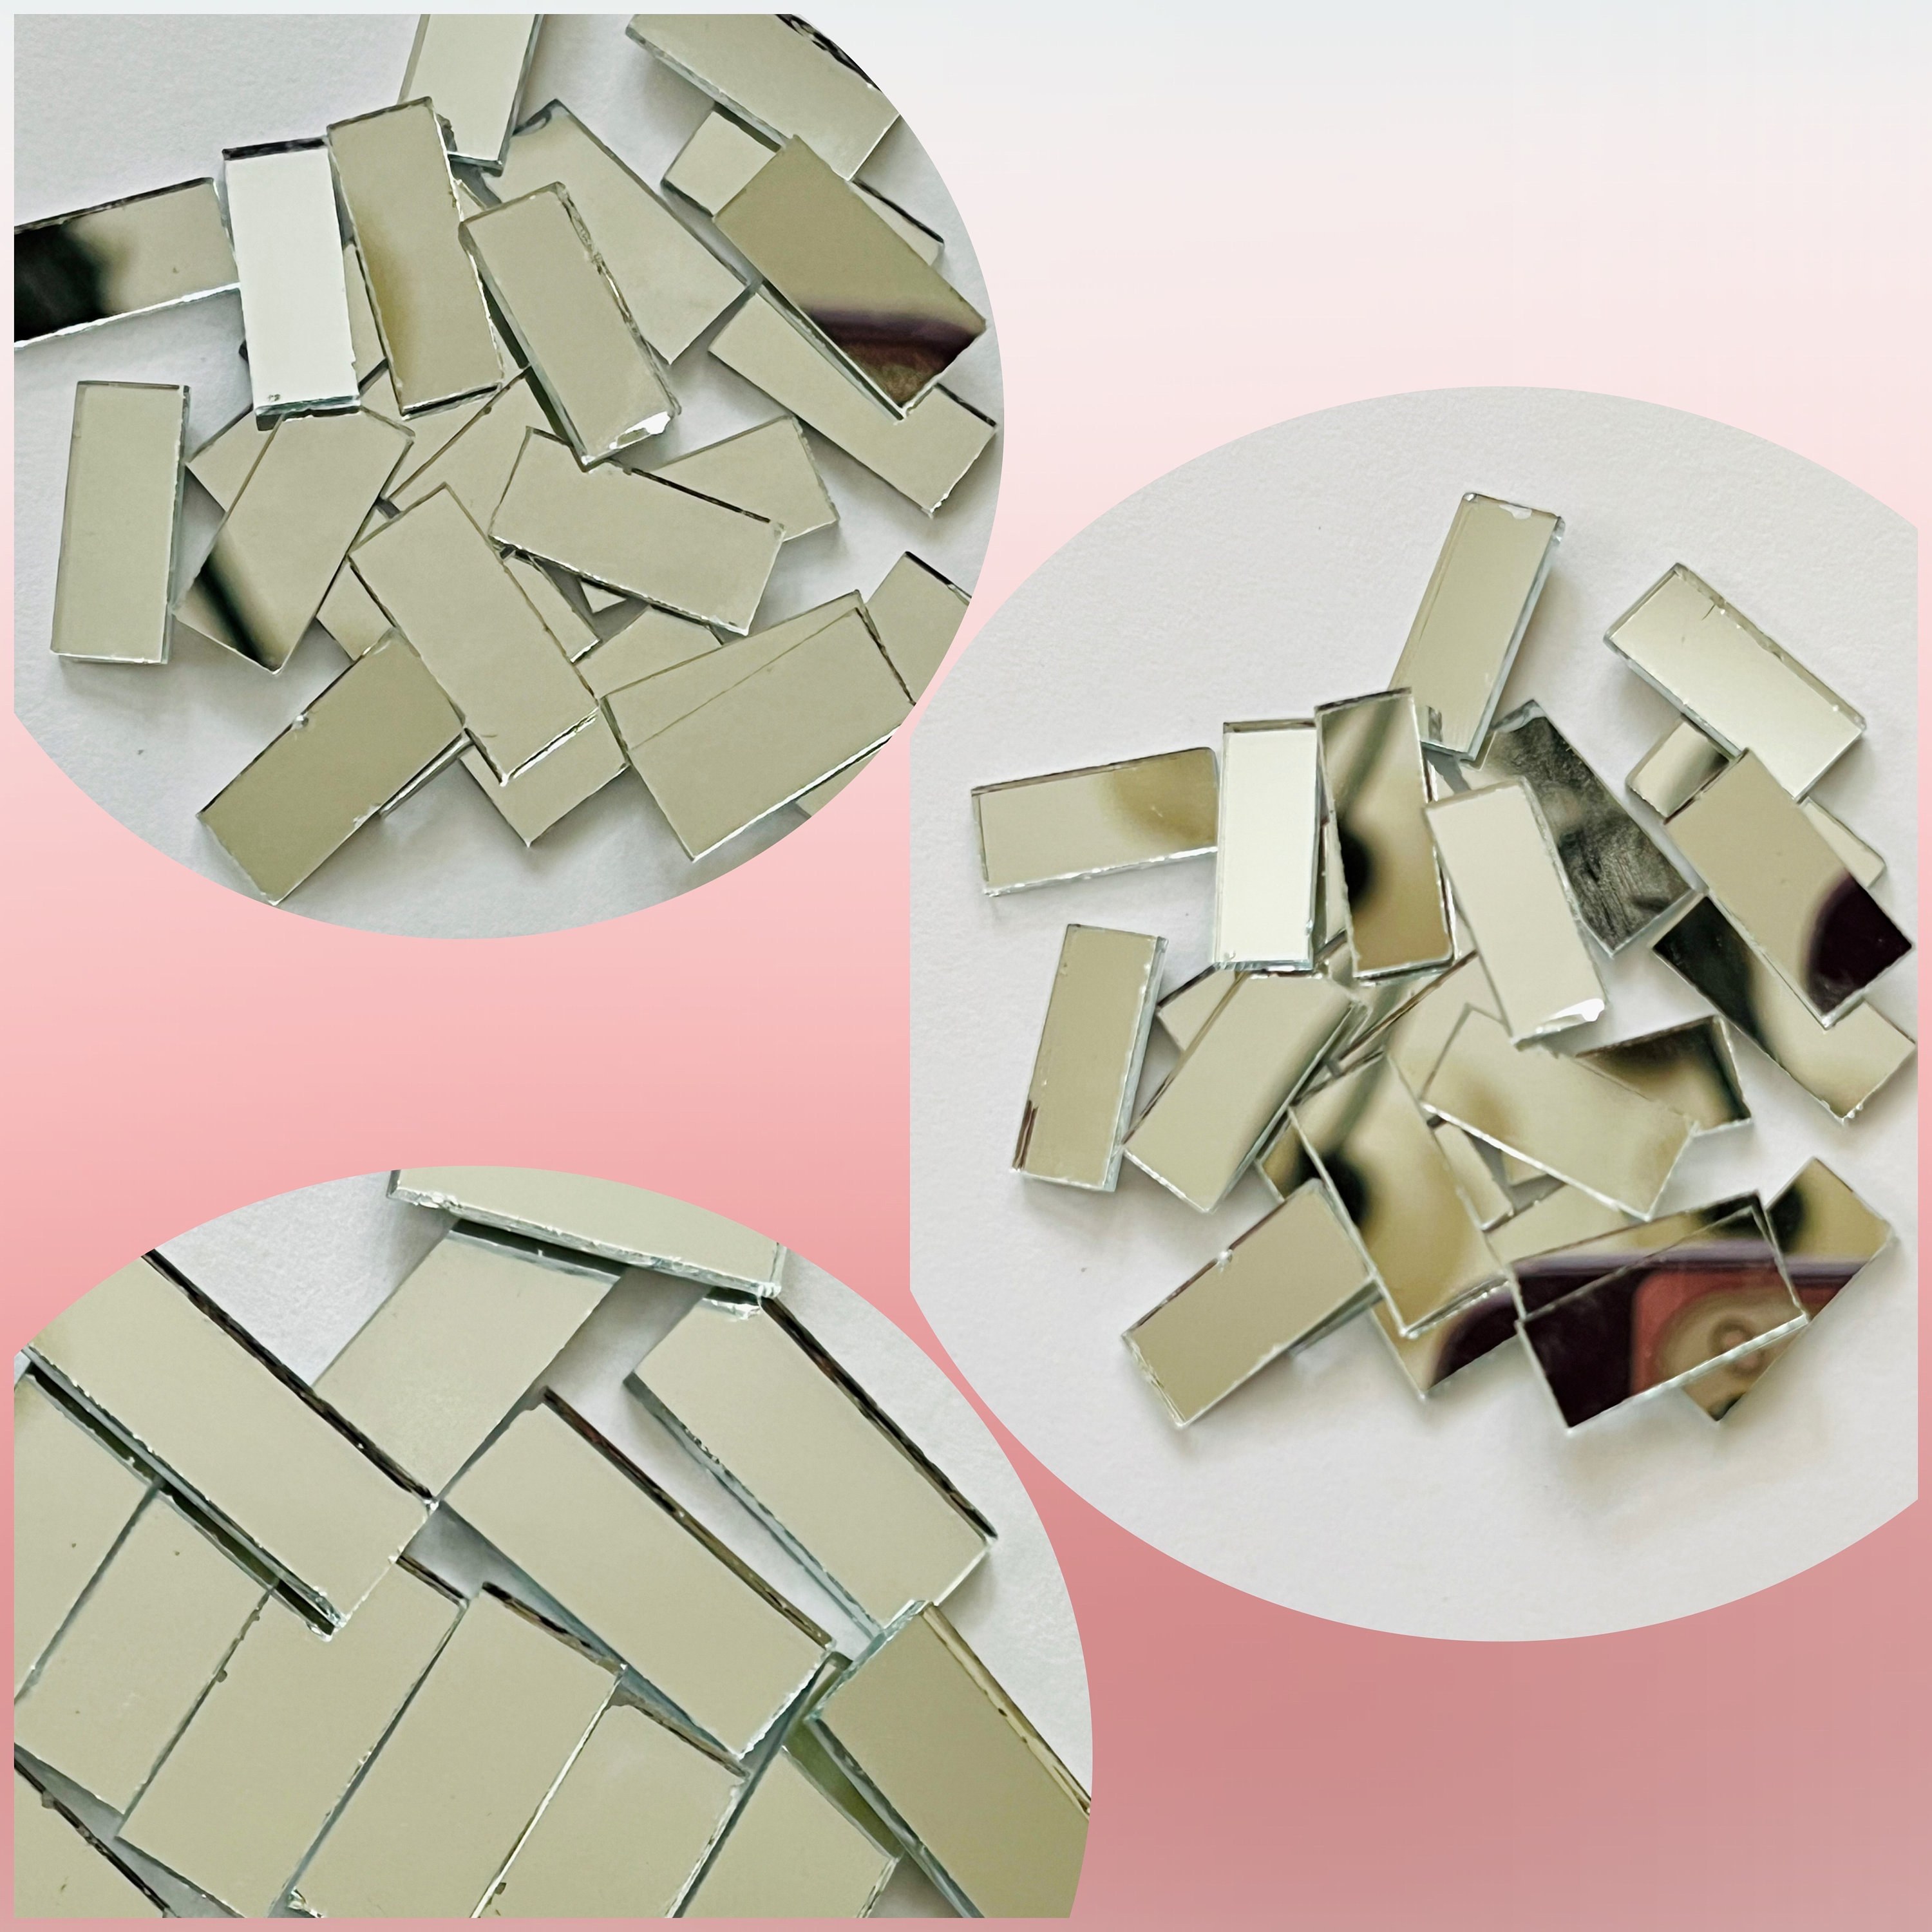 1000 Pcs Mini Diamond Shape Mirror Tiles for Crafts,1 x 0.5 Inch Rhombus  Mini Mosaic Tiles Small Mirror Pieces Glass Tiles for Wall Home Decoration